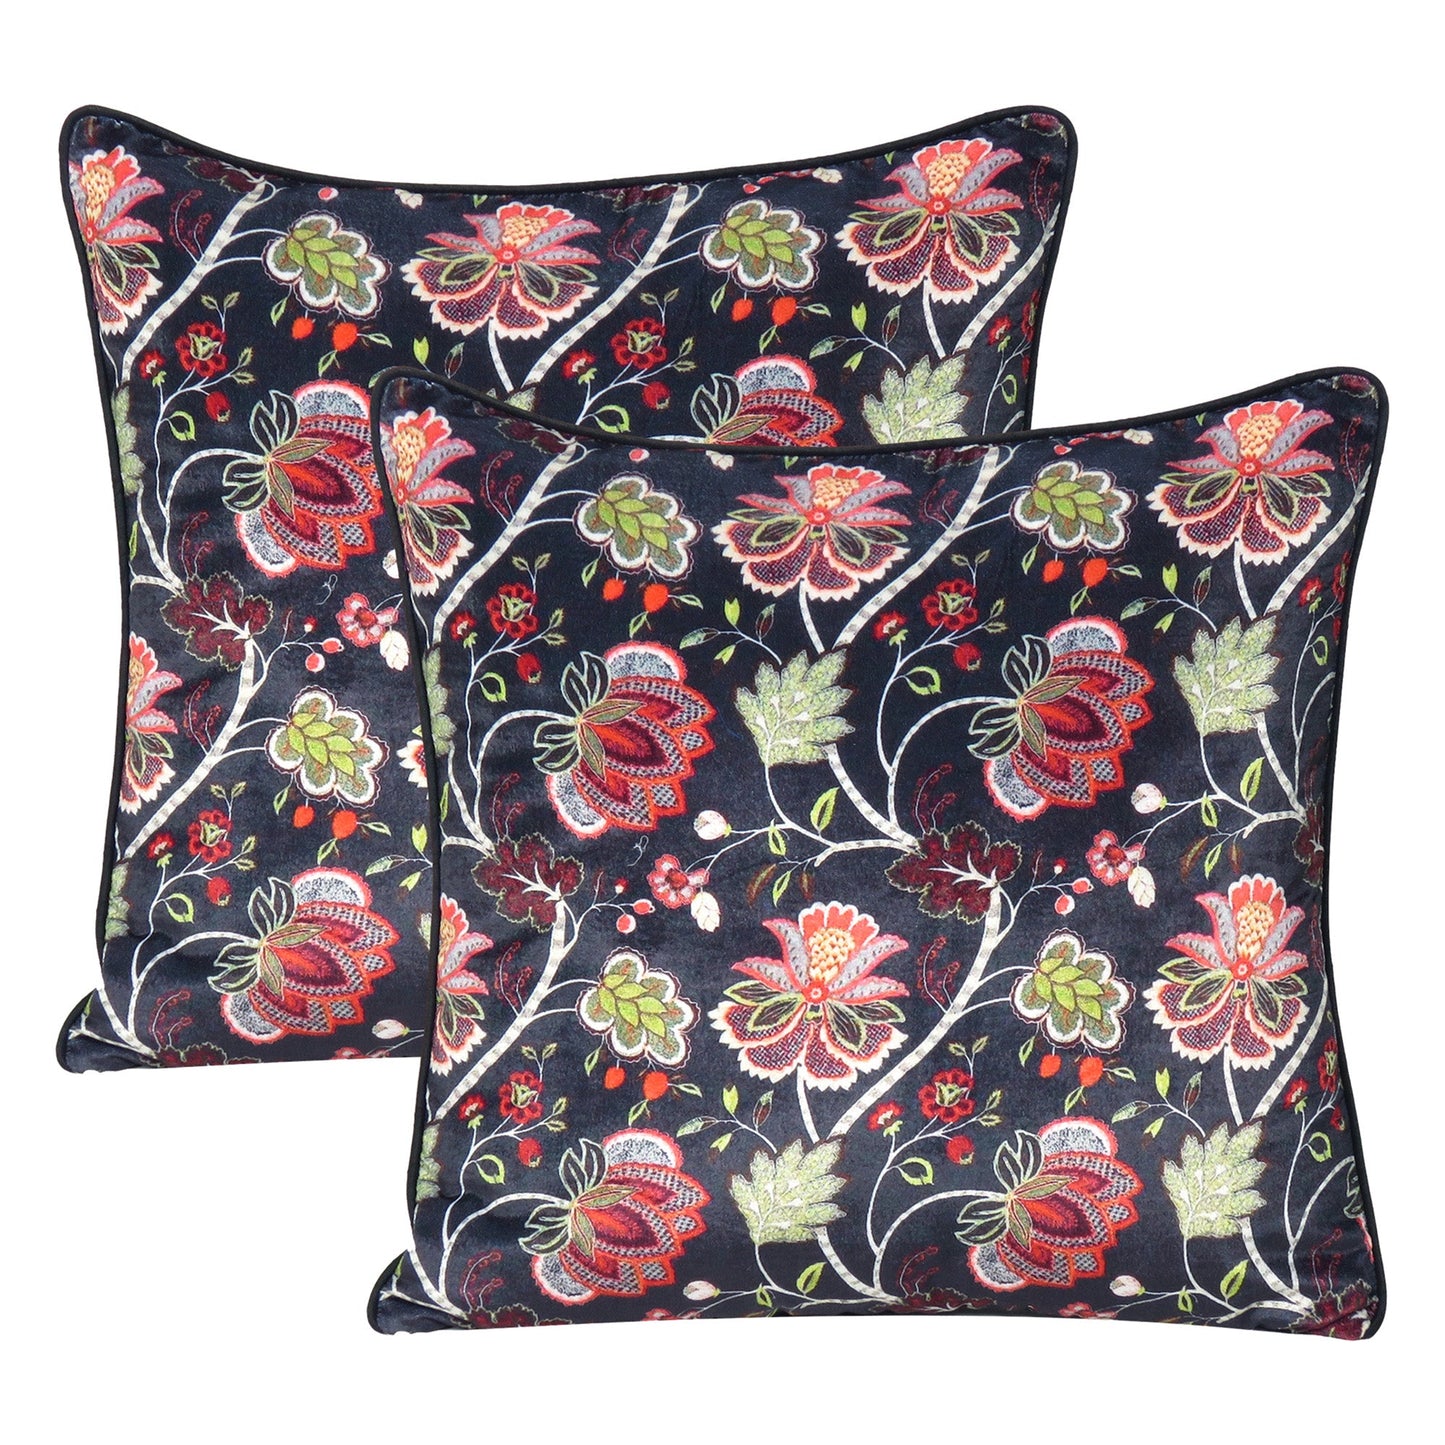 Velvet Polydupion Printed Cushion Covers in Set of 2 - Black